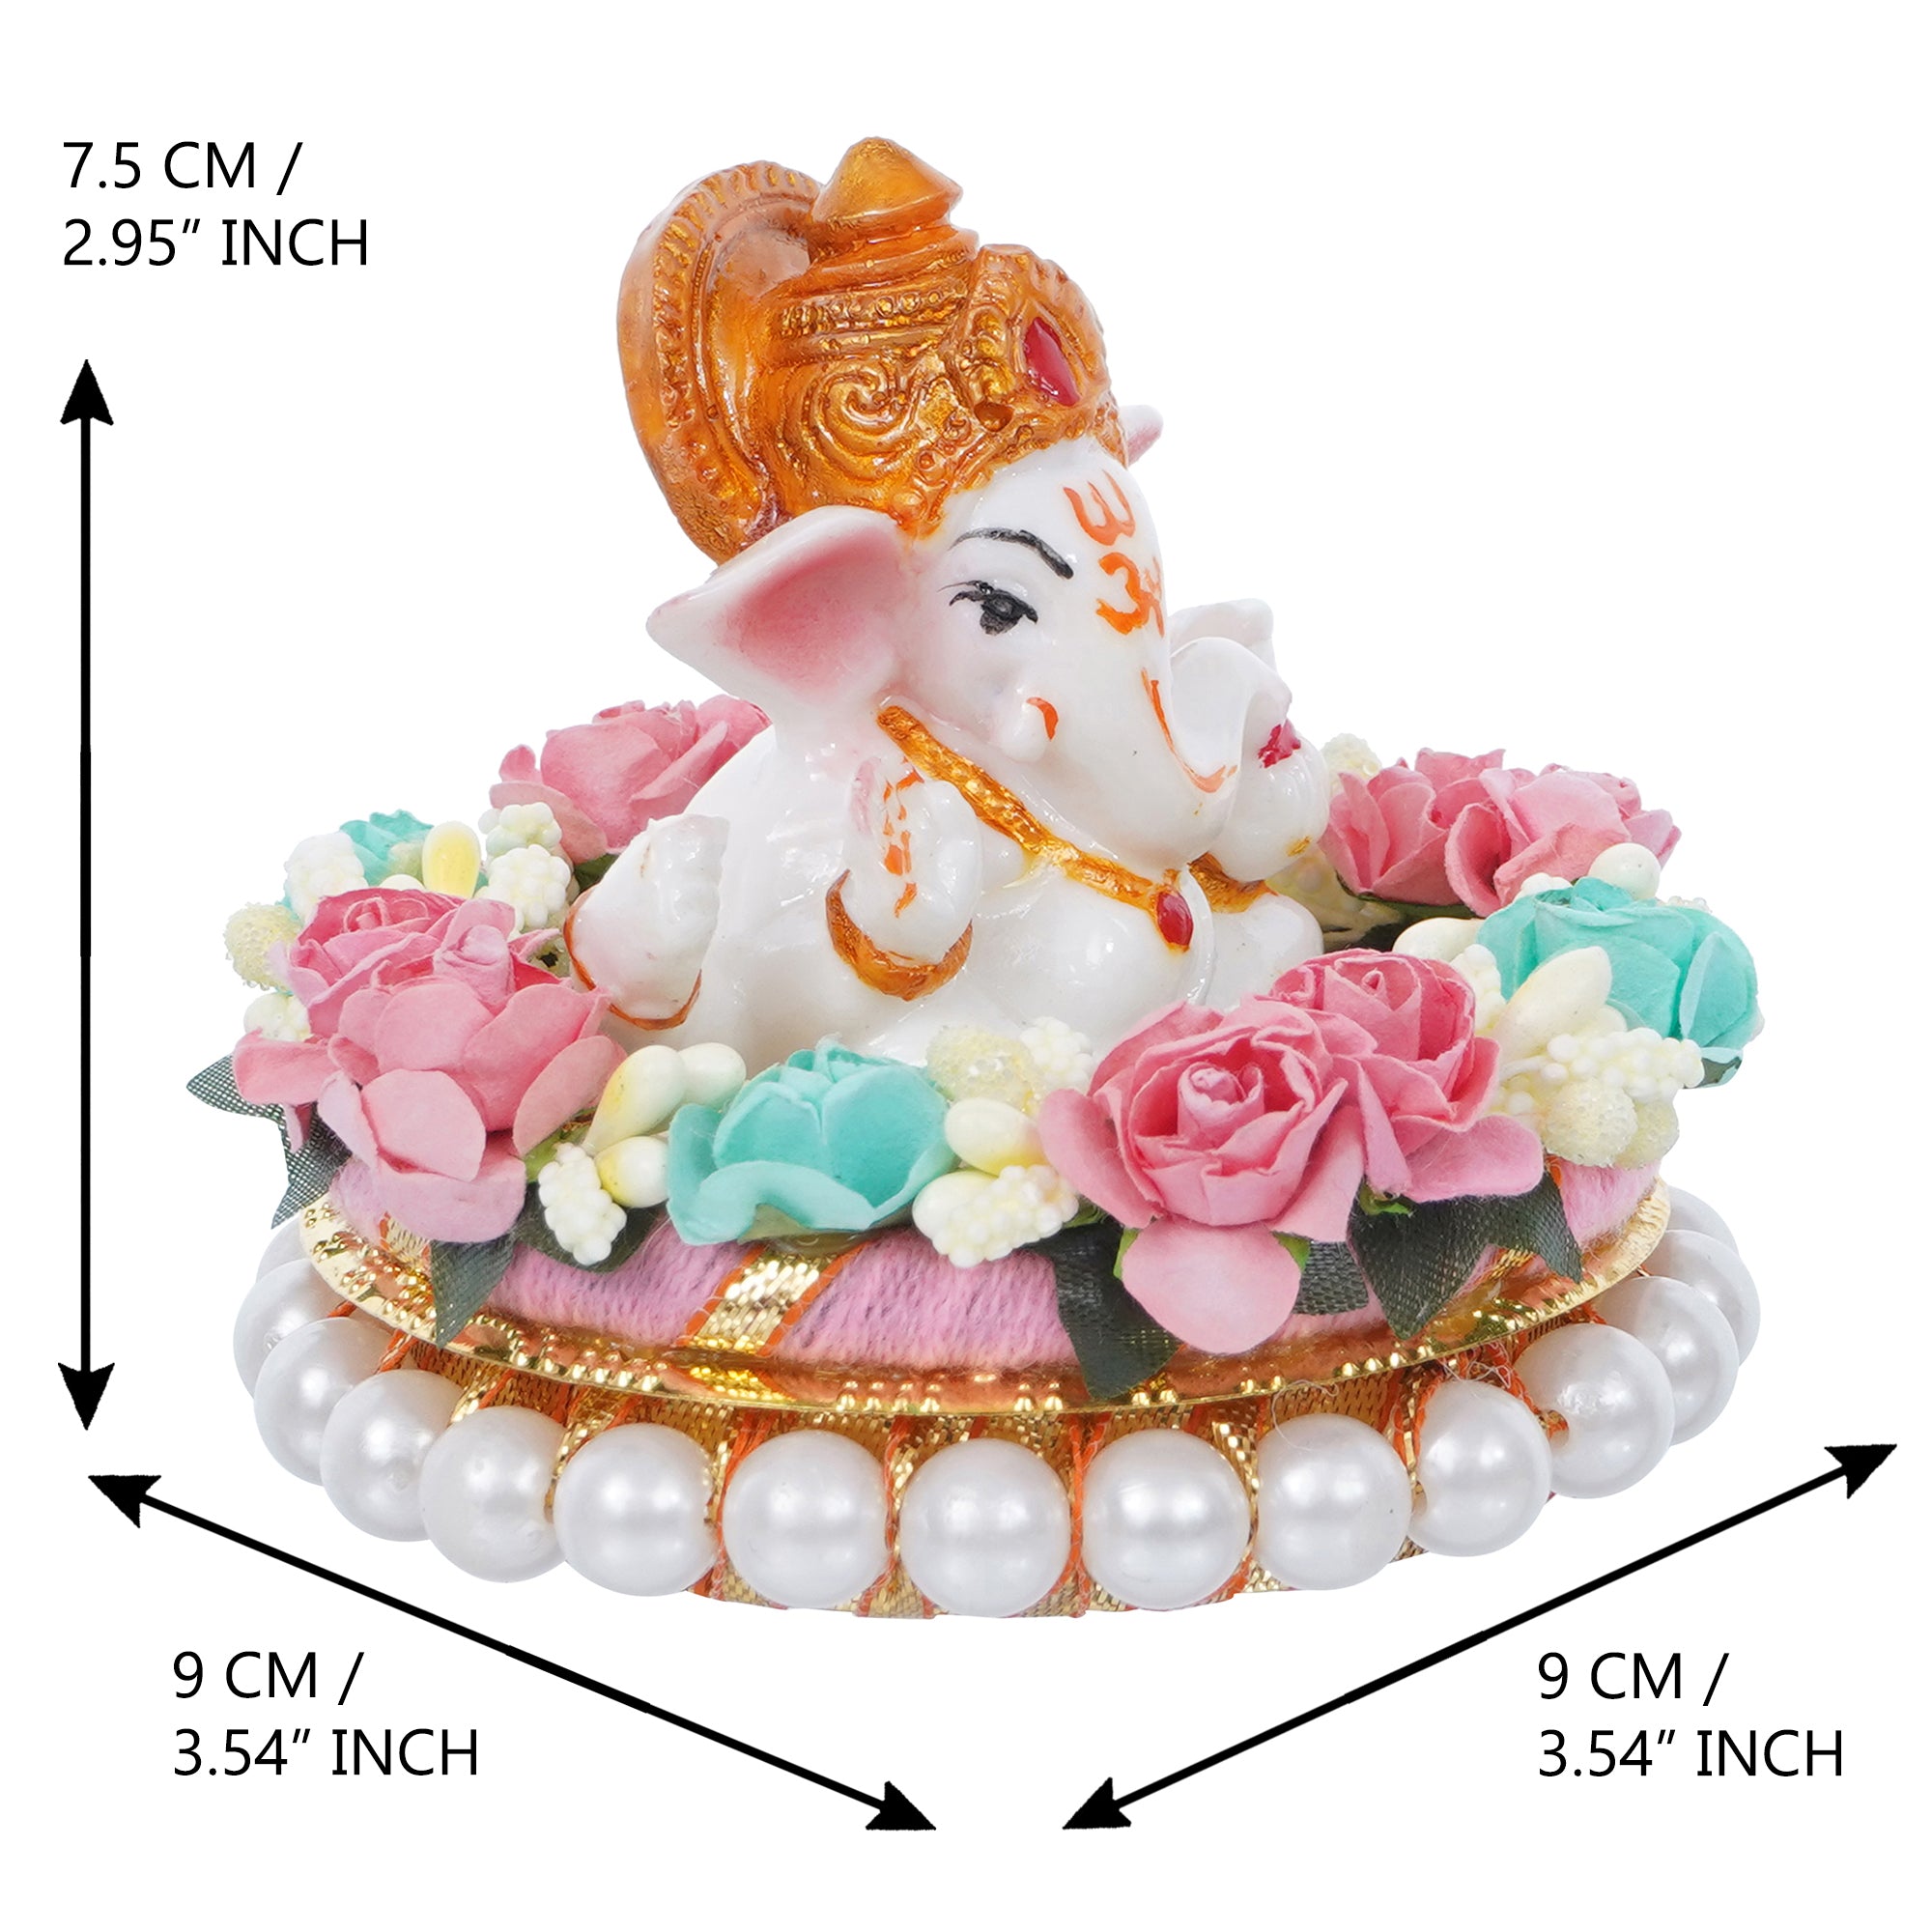 Lord Ganesha Idol On Decorative Handcrafted Colorful Flowers Plate 3